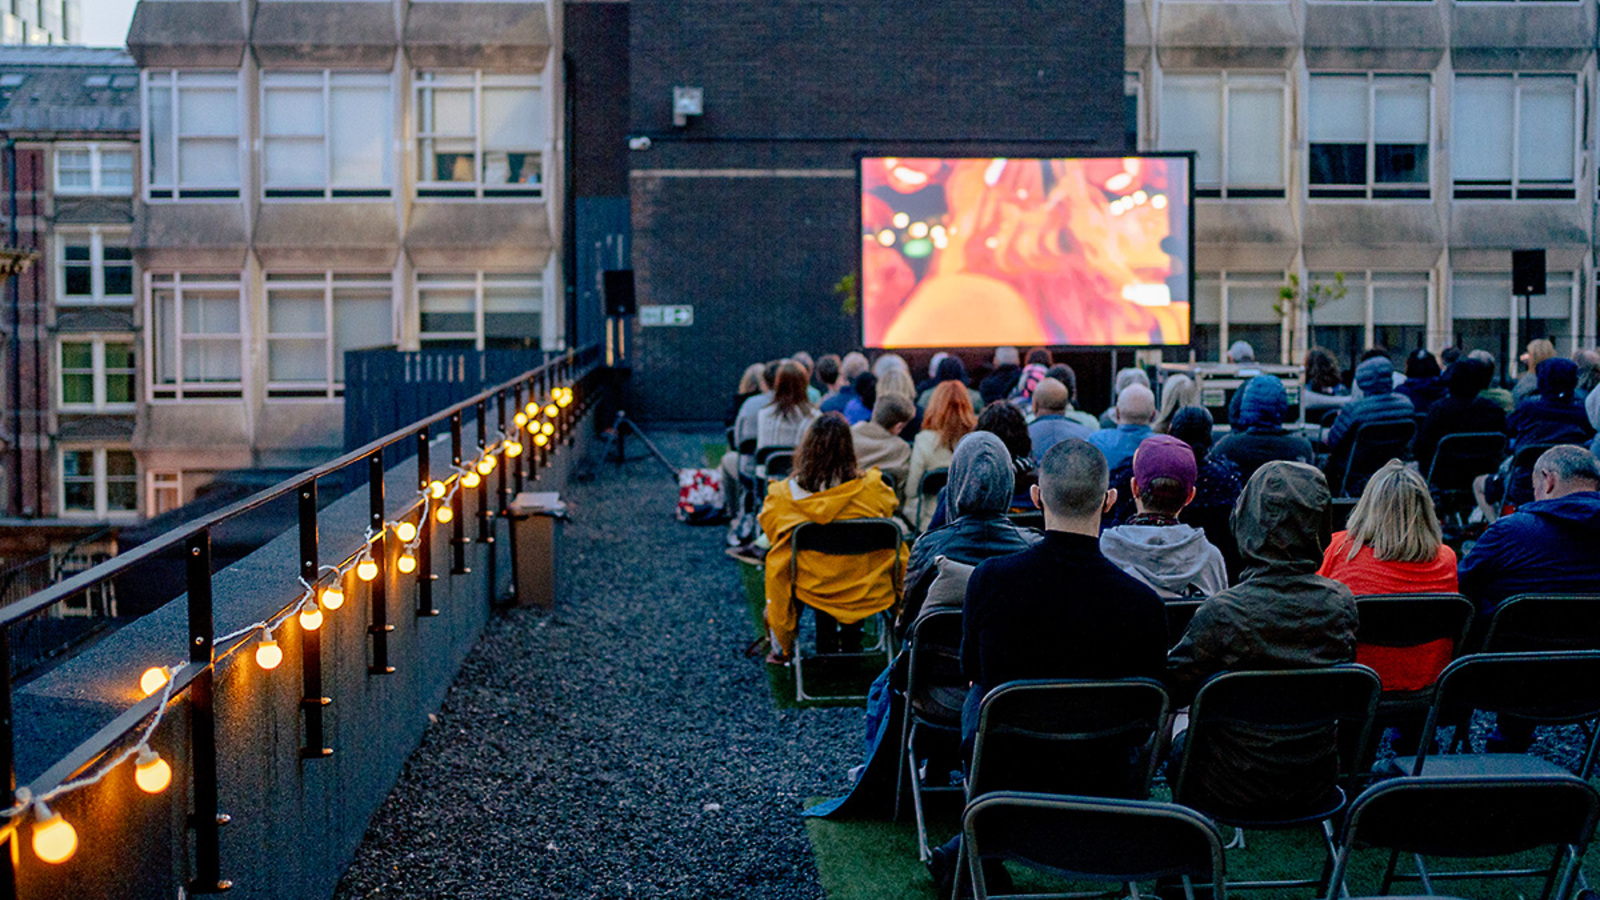 Audiences at a rooftop screening as part of FACT's Cinema in the City programme